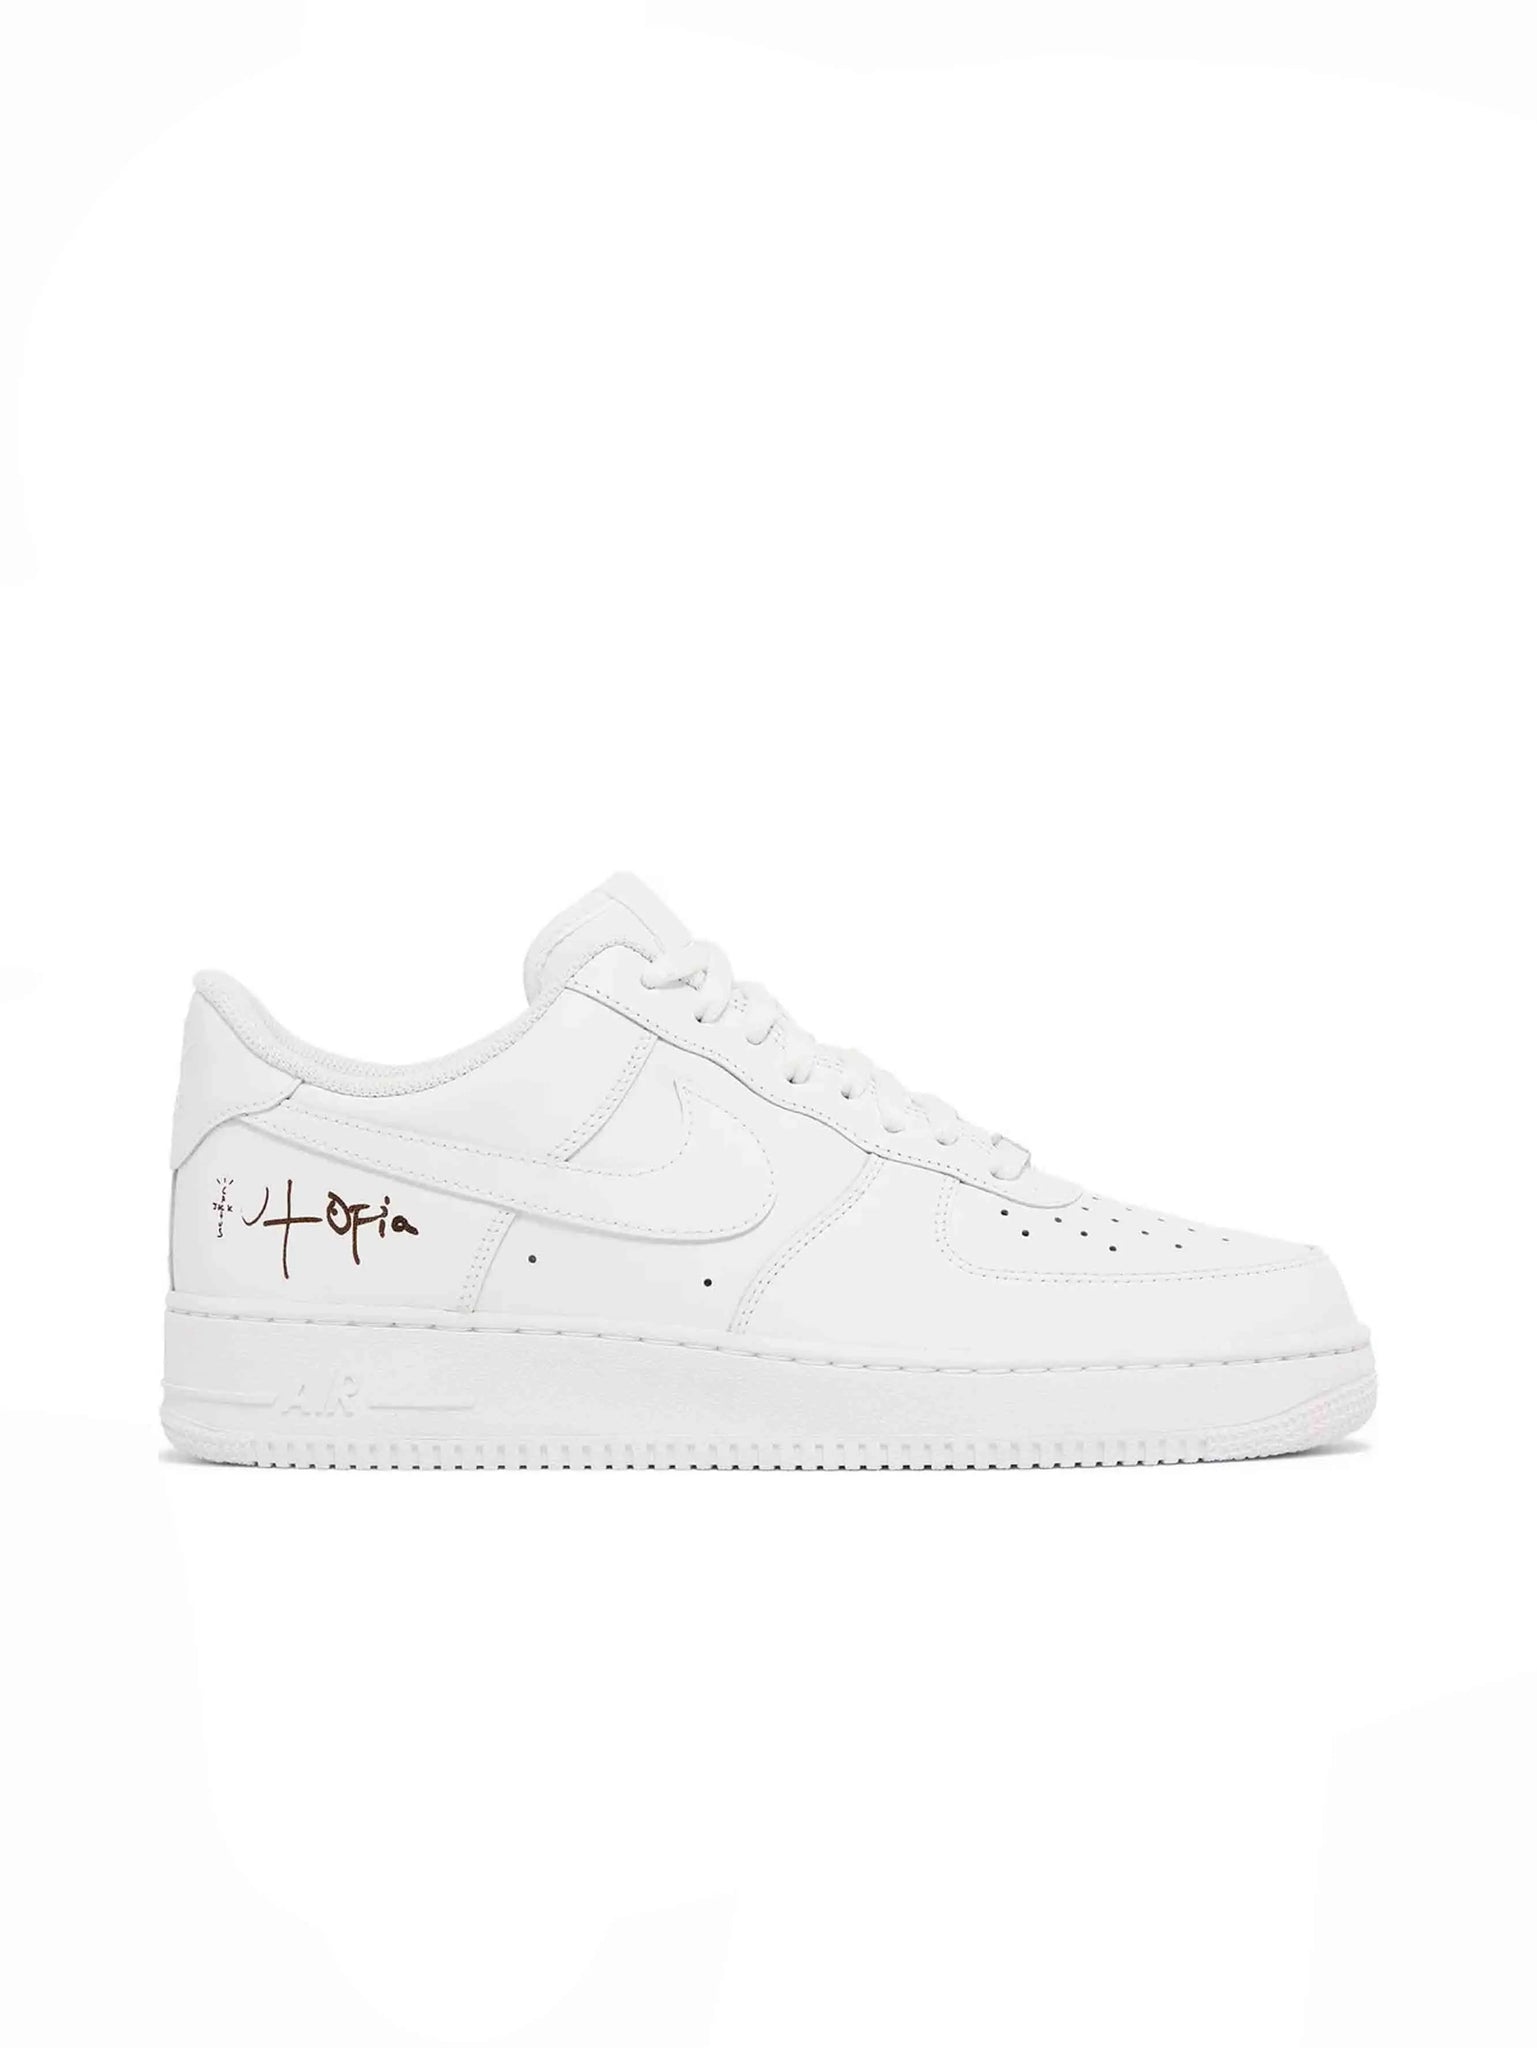 Nike Air Force 1 Low '07 White (Travis Scott Cactus Jack Utopia Edition) in Auckland, New Zealand - Shop name